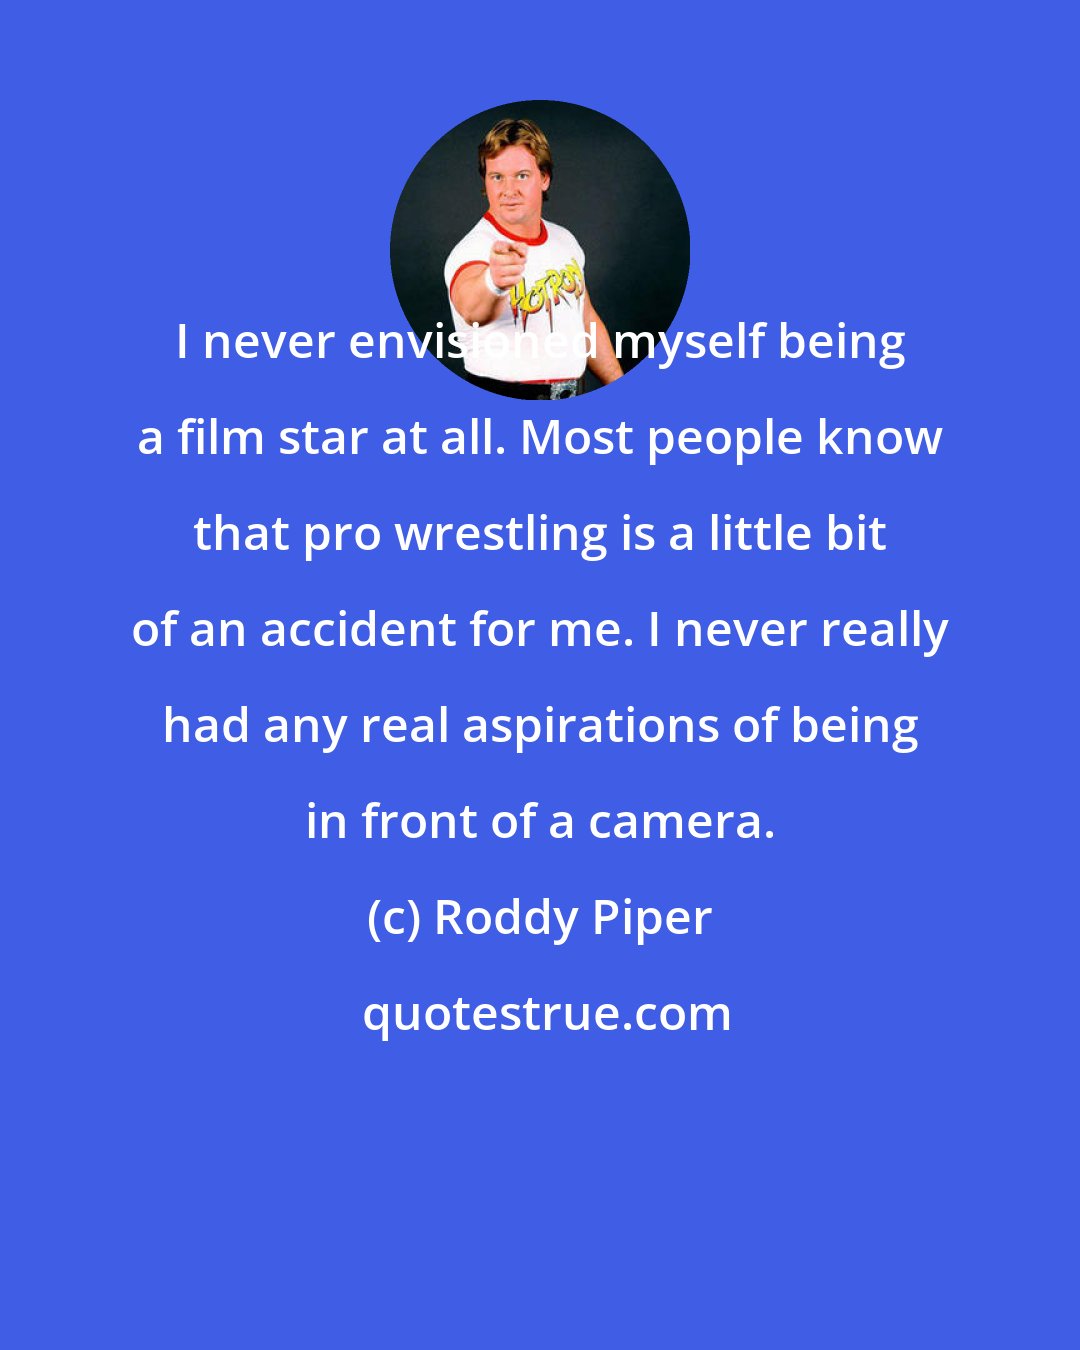 Roddy Piper: I never envisioned myself being a film star at all. Most people know that pro wrestling is a little bit of an accident for me. I never really had any real aspirations of being in front of a camera.